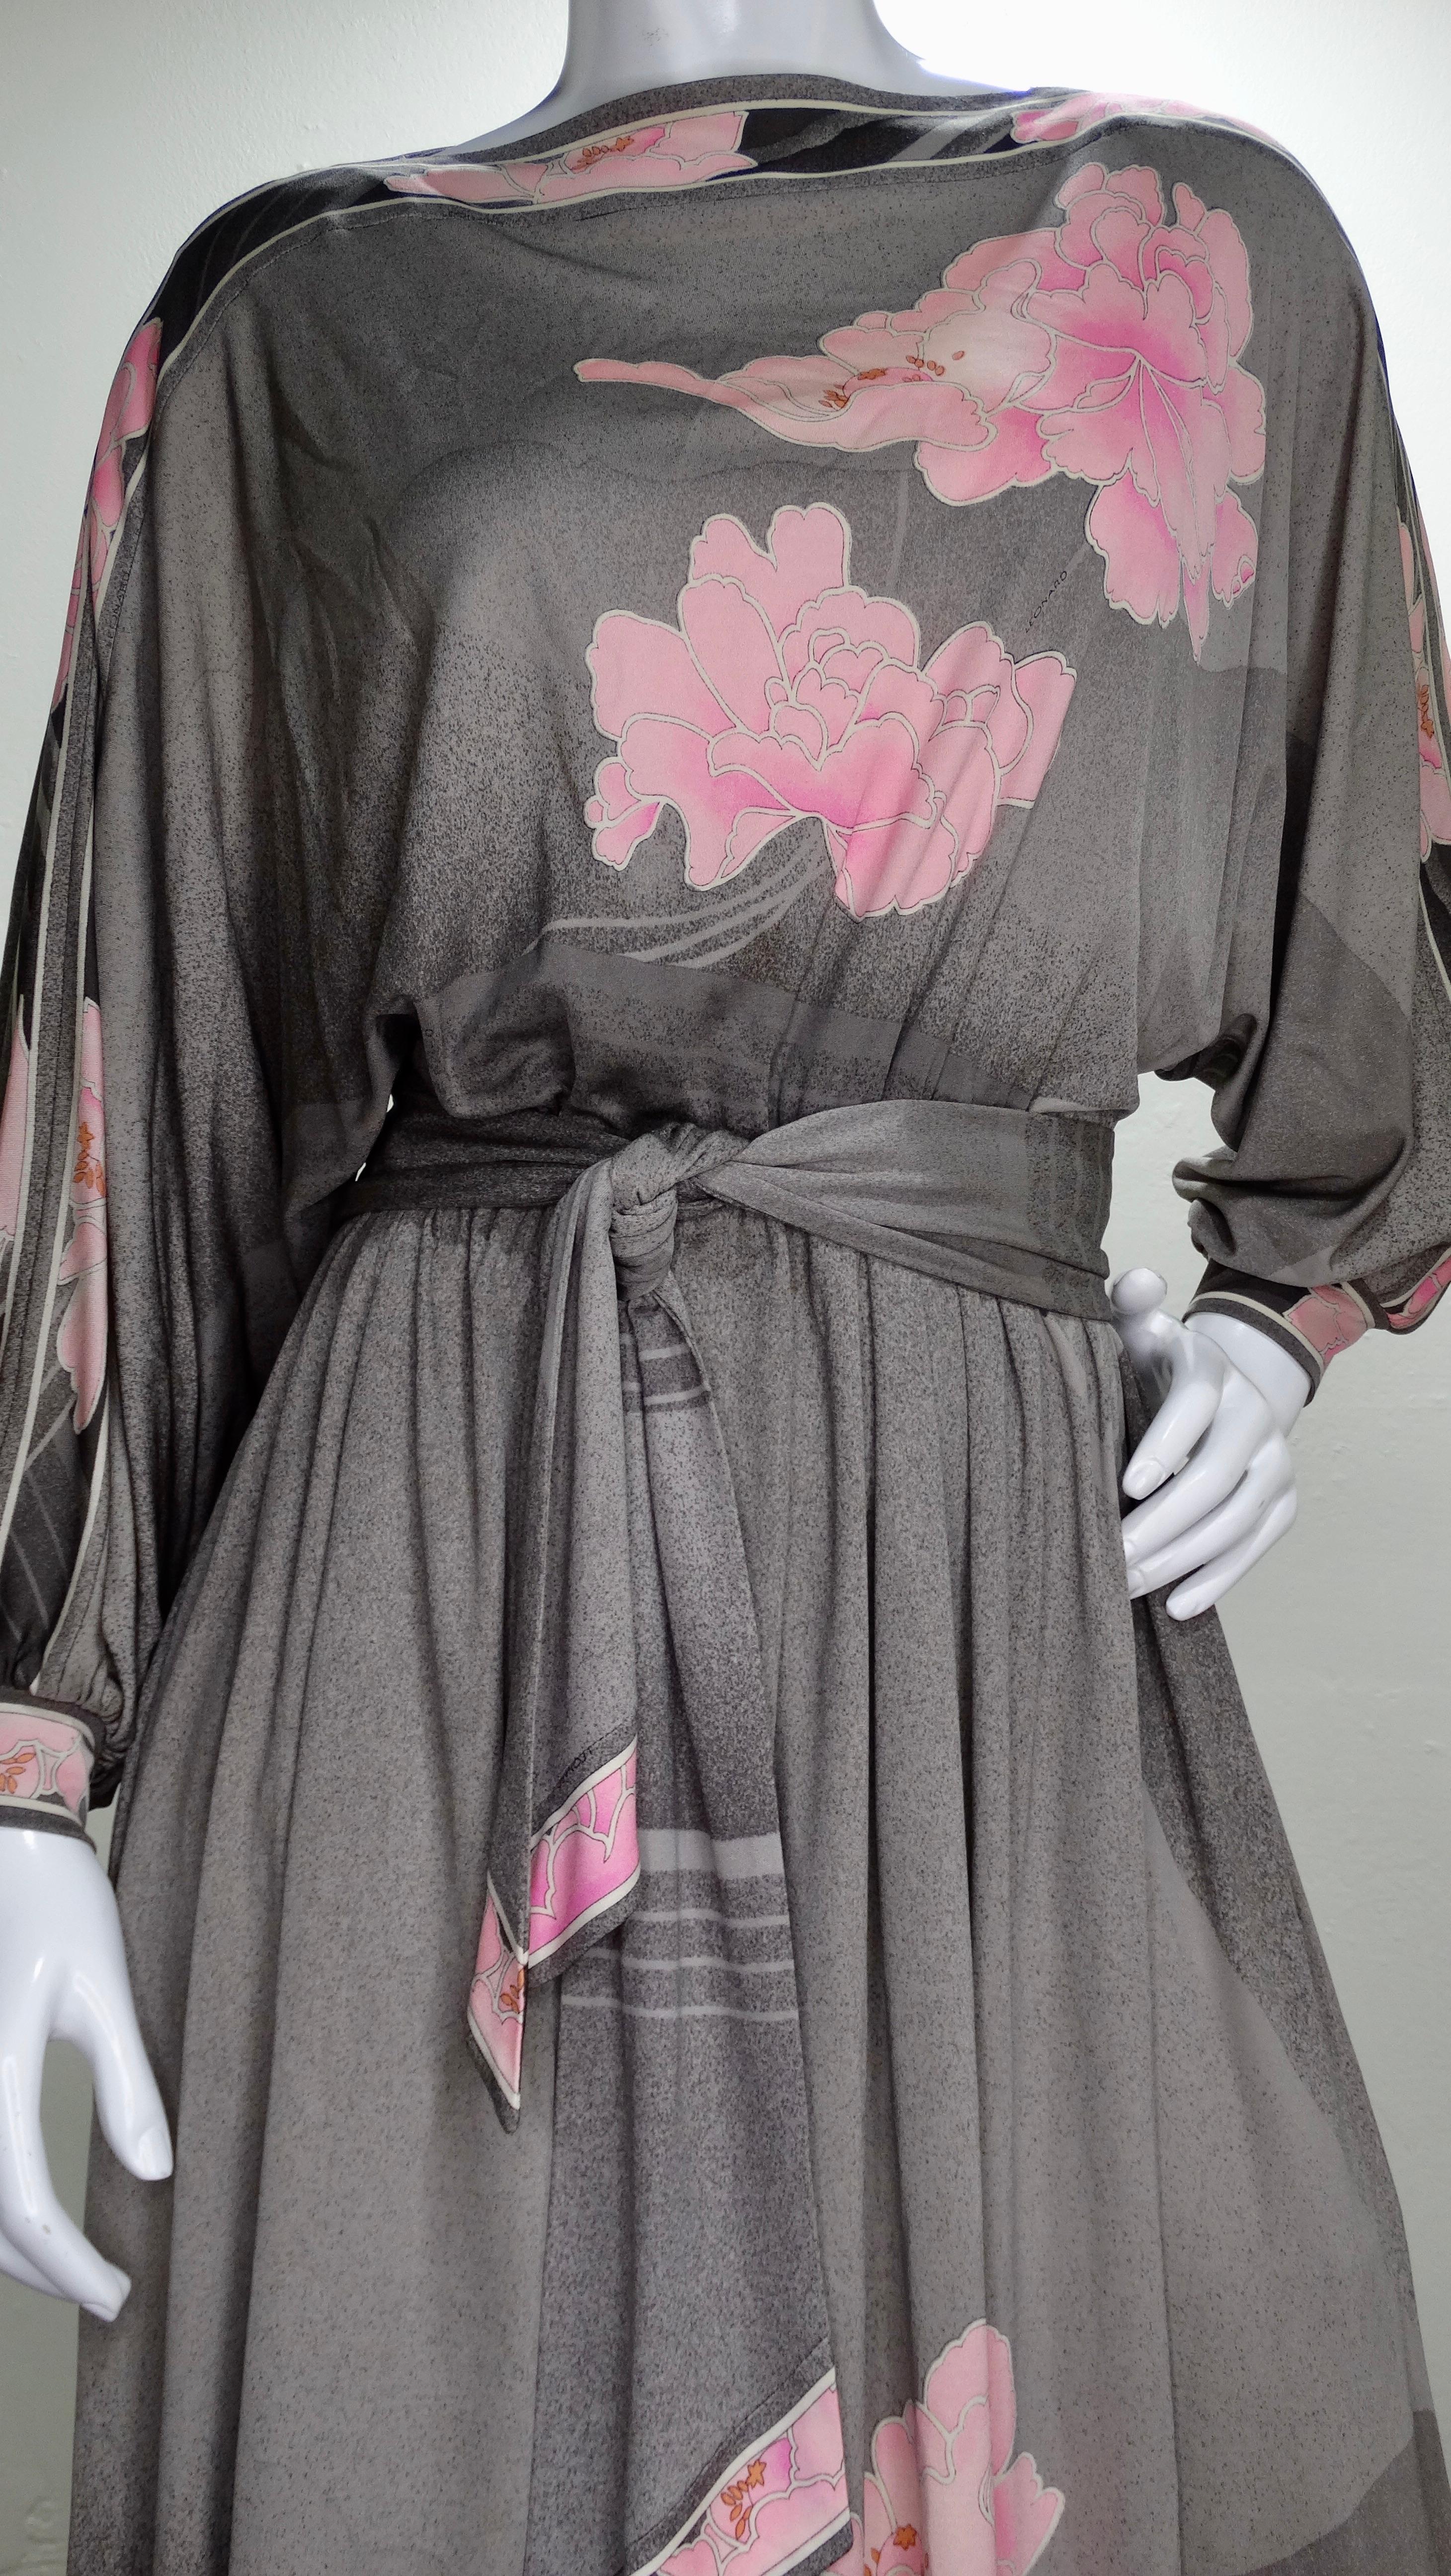 A beautiful 1970s Leonard Paris dress! Made from soft Silk Jersey, this dress features a water colored grey overall color with gradient pink floral motifs throughout. Inseam pockets, boat neckline, dolman style sleeves and a tie belt. Perfect for a